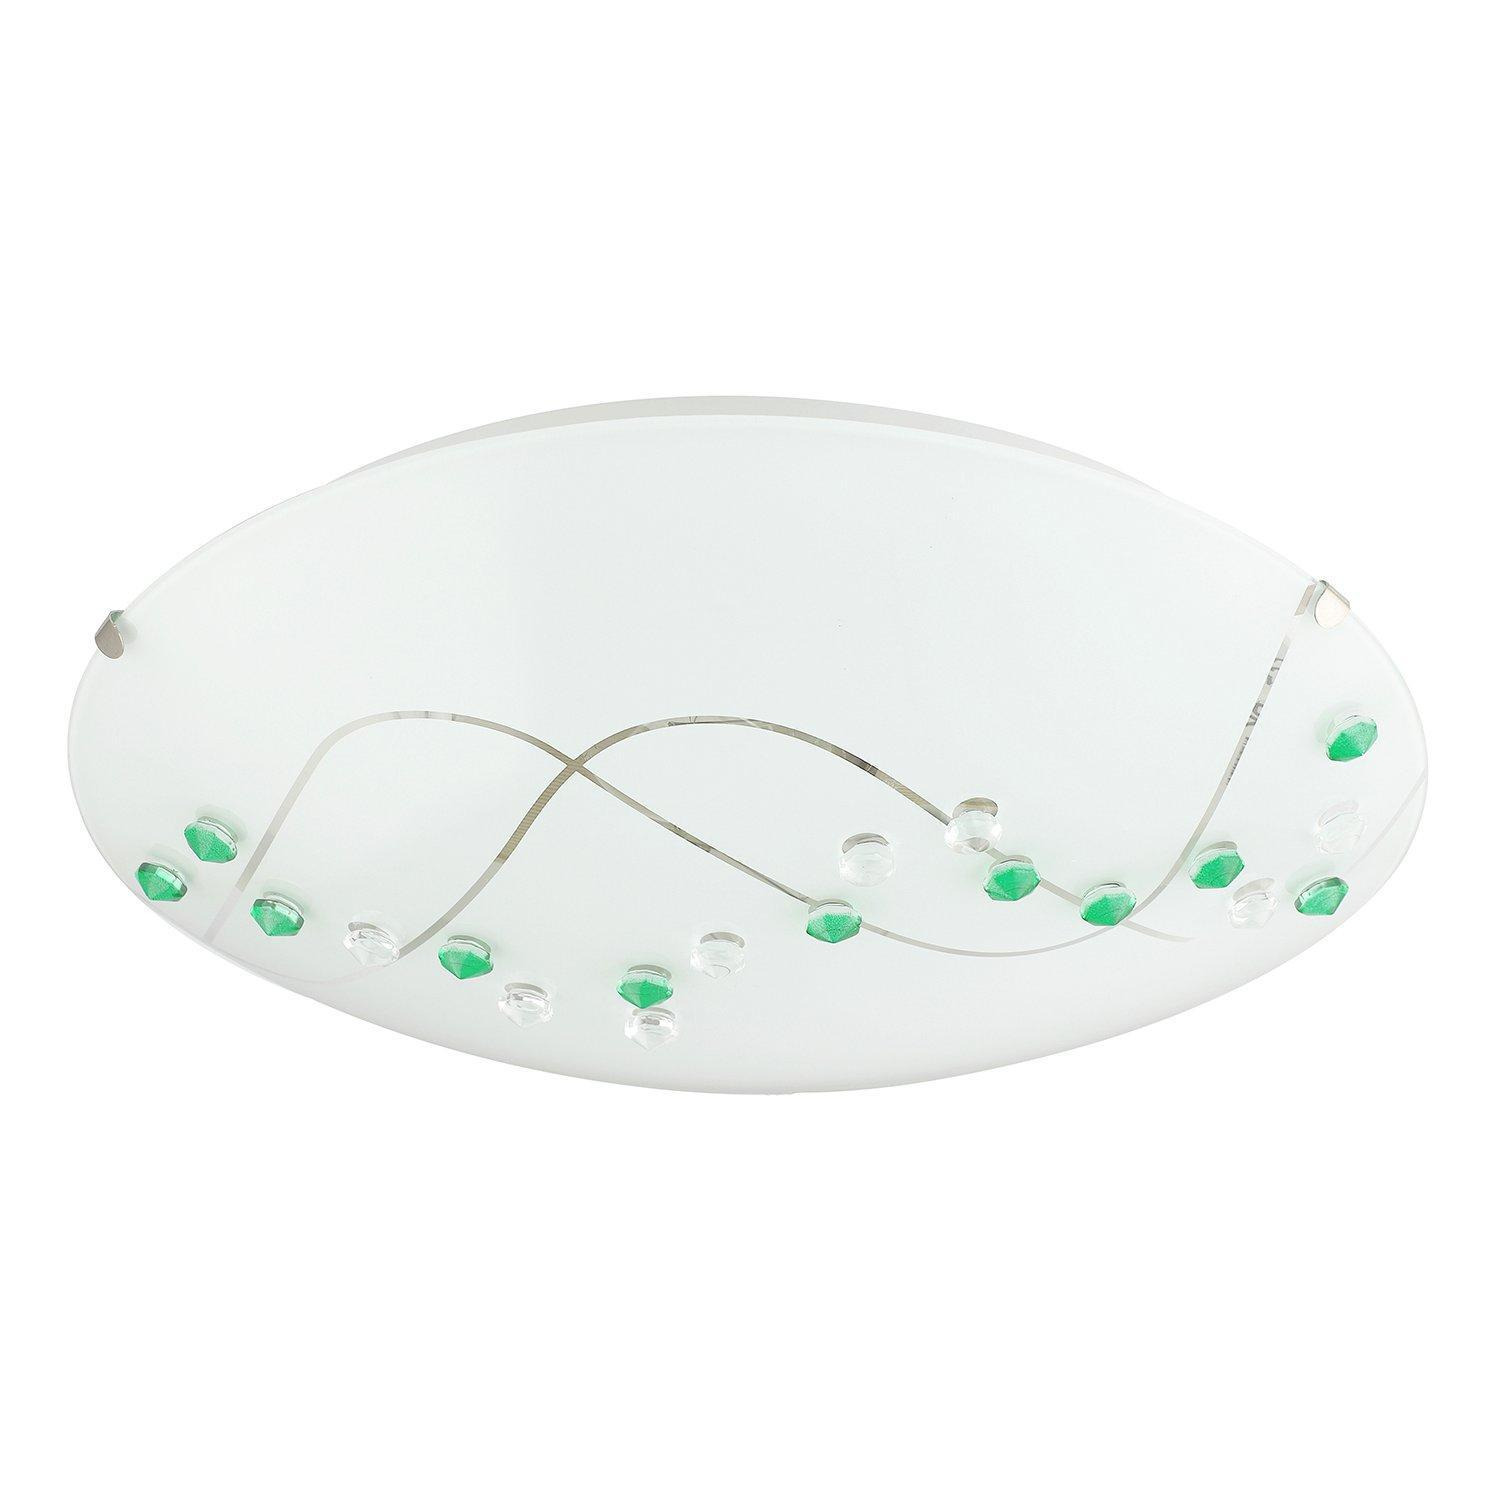 Contemporary Round Opal Glass Ceiling Light with Coloured and Clear Crystal Buttons - image 1